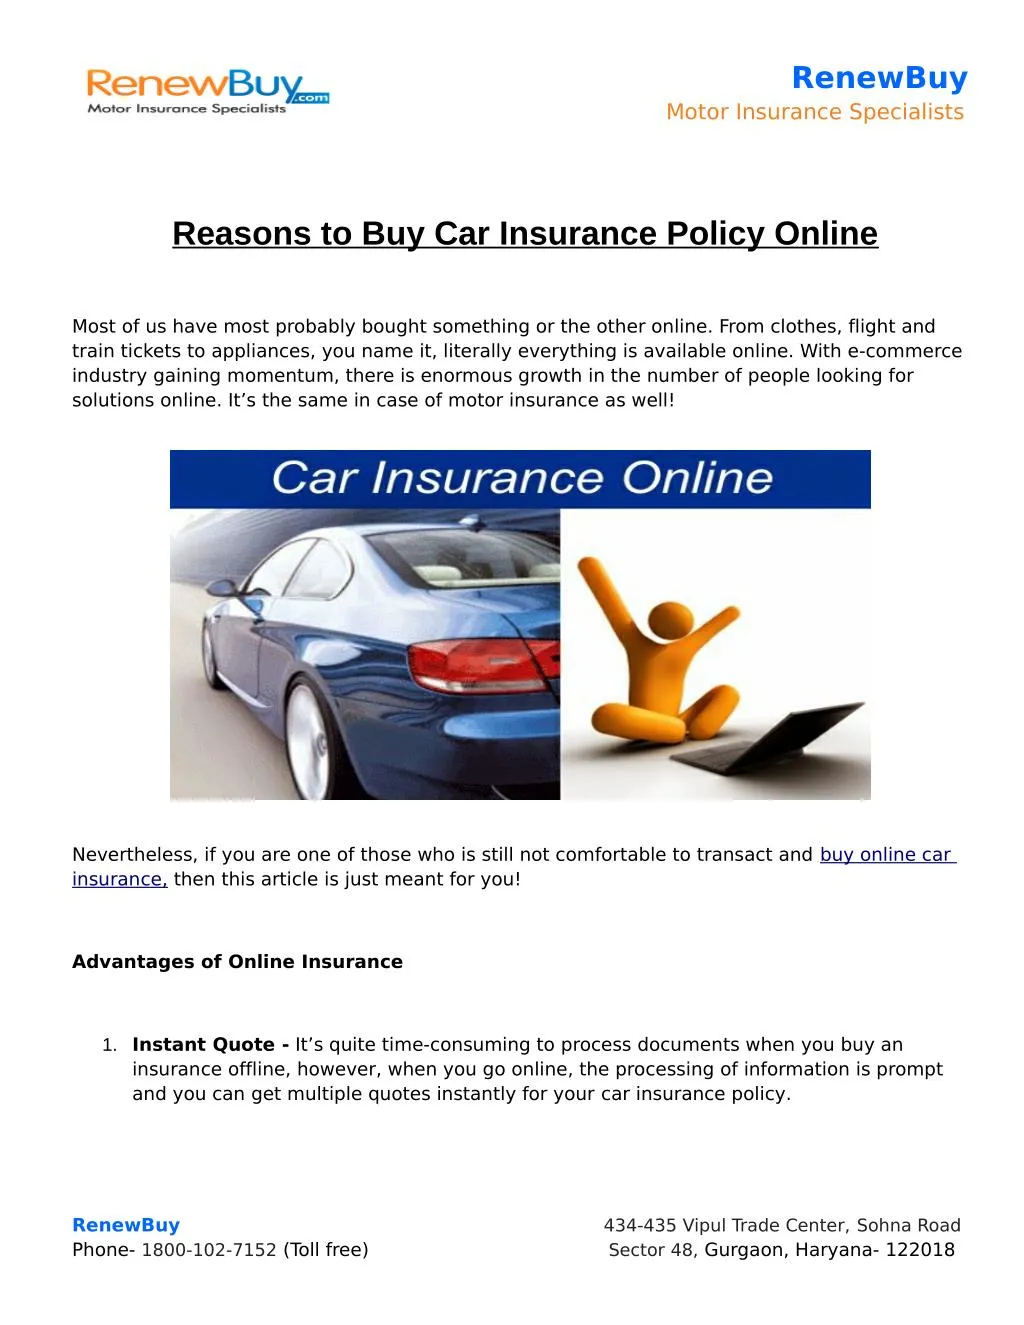 PPT Reasons to Buy Car Insurance Policy Online